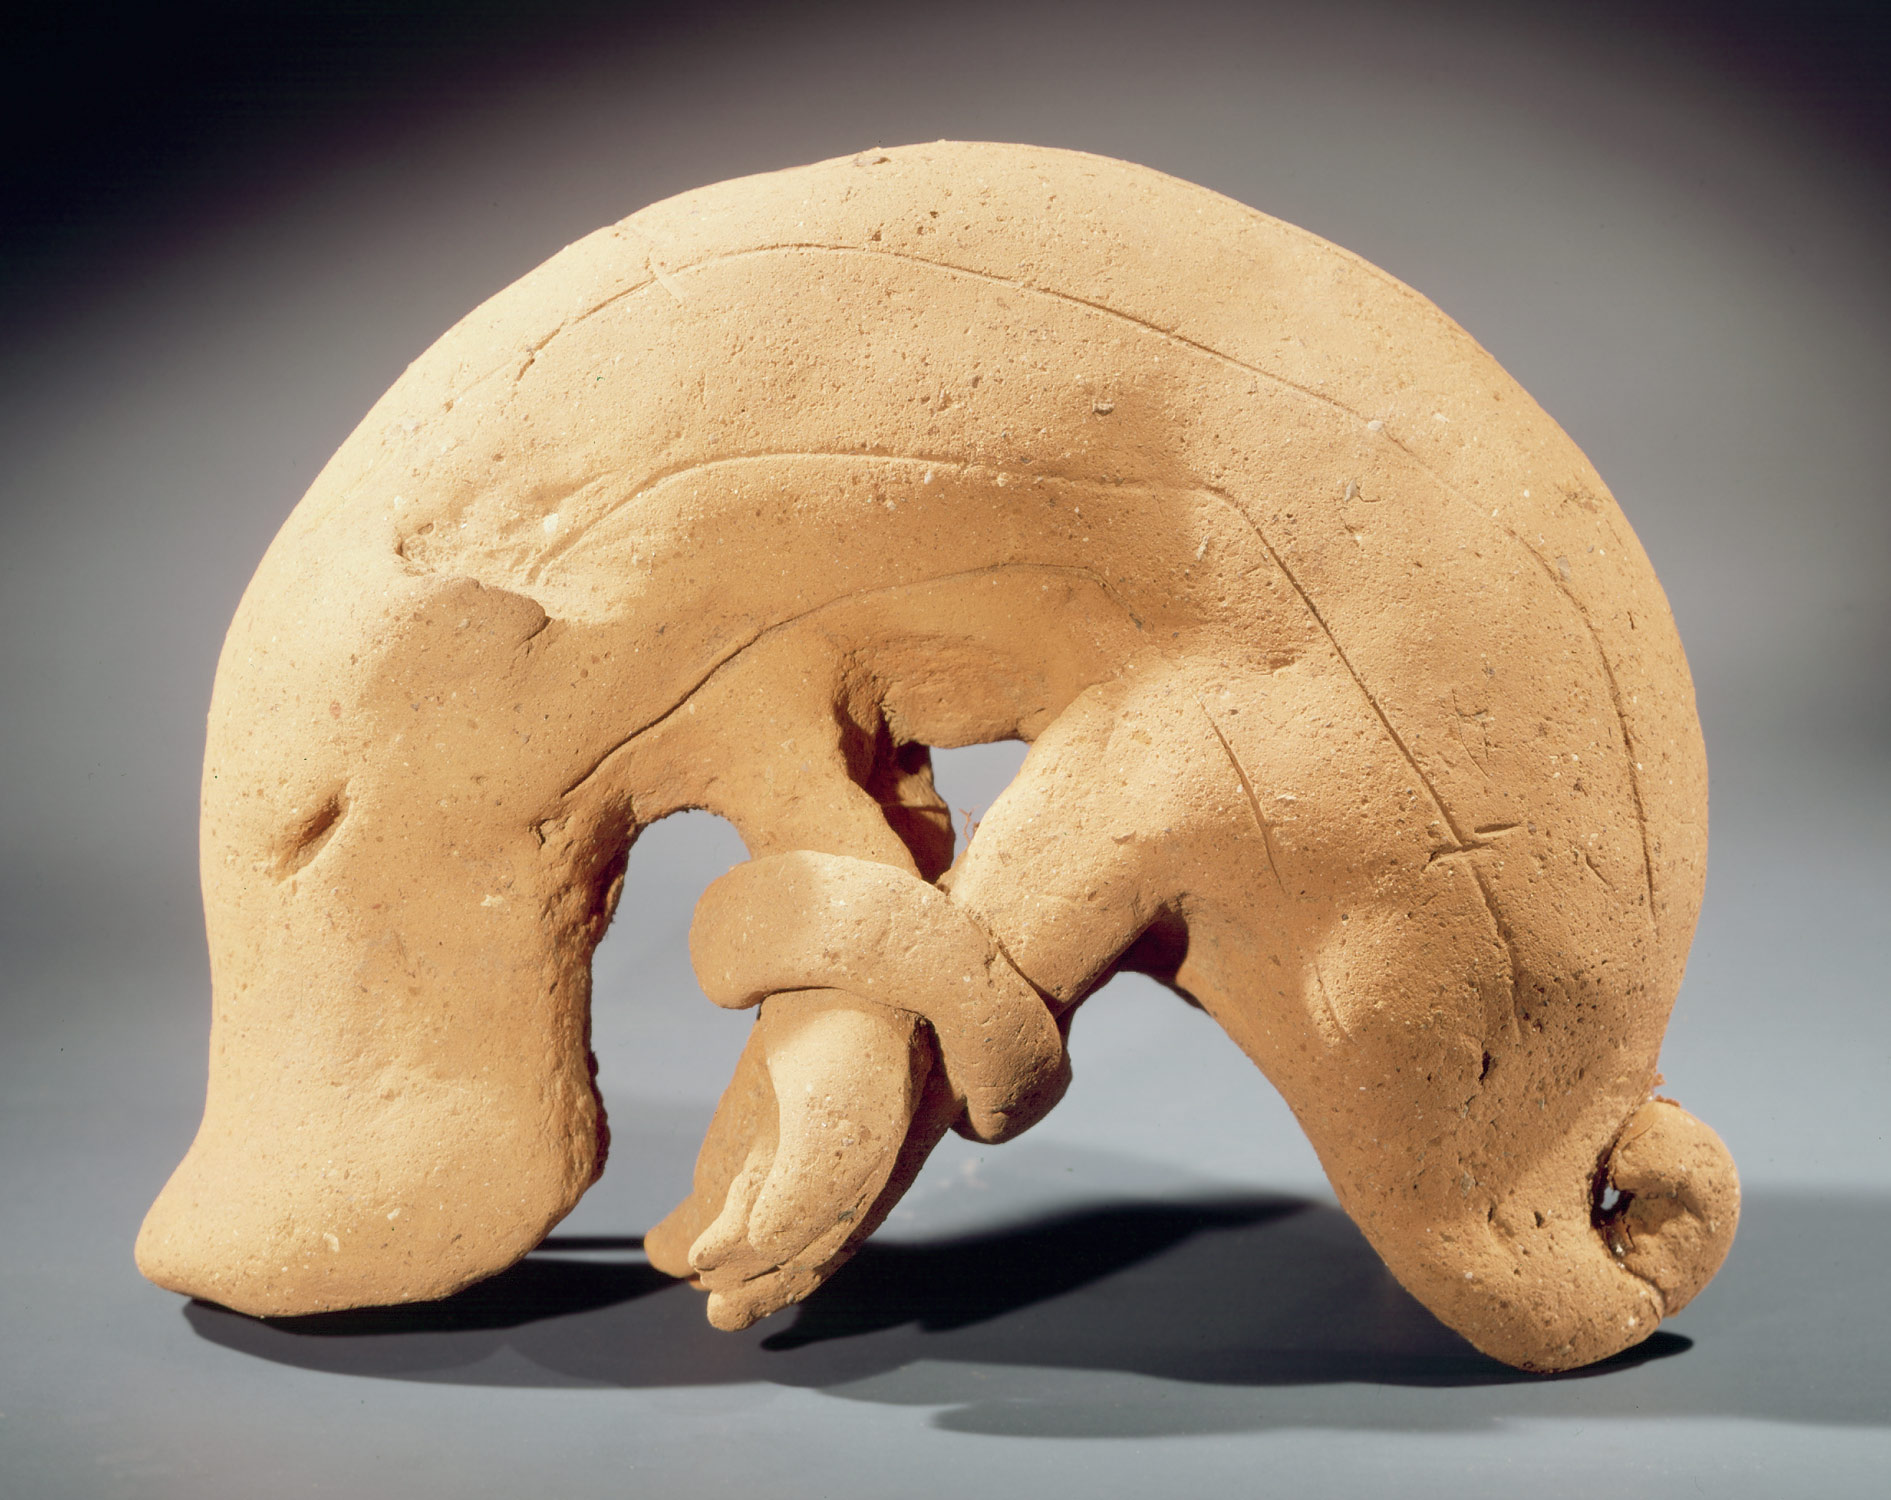 Working Title/Artist: Haniwa Boar Department: Asian Culture/Period/Location: Kofun HB/TOA Date Code: 05 Working Date: ca. 5th c. photographed by mma in 1975 transparency 2B scanned by film & media 3/2/00